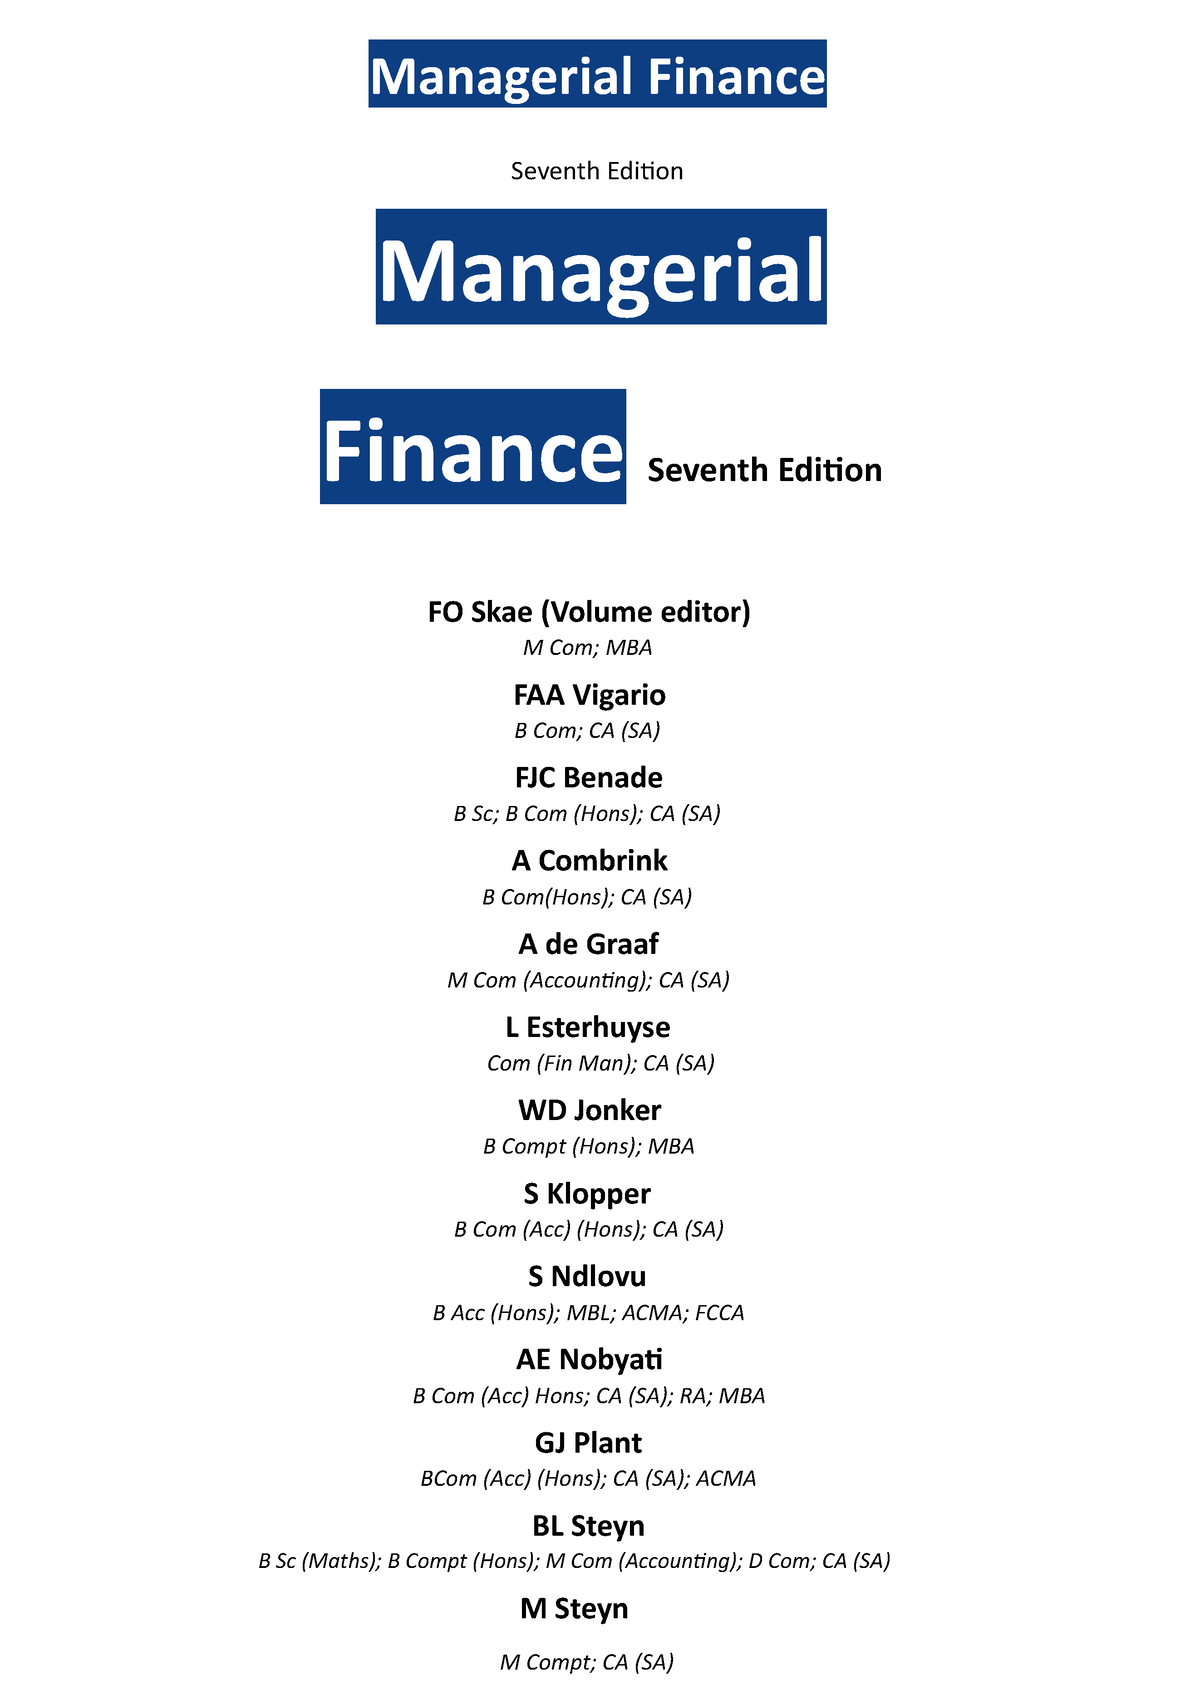 Managerial Finance (7th Edition)-2014-Skae - Google Docs